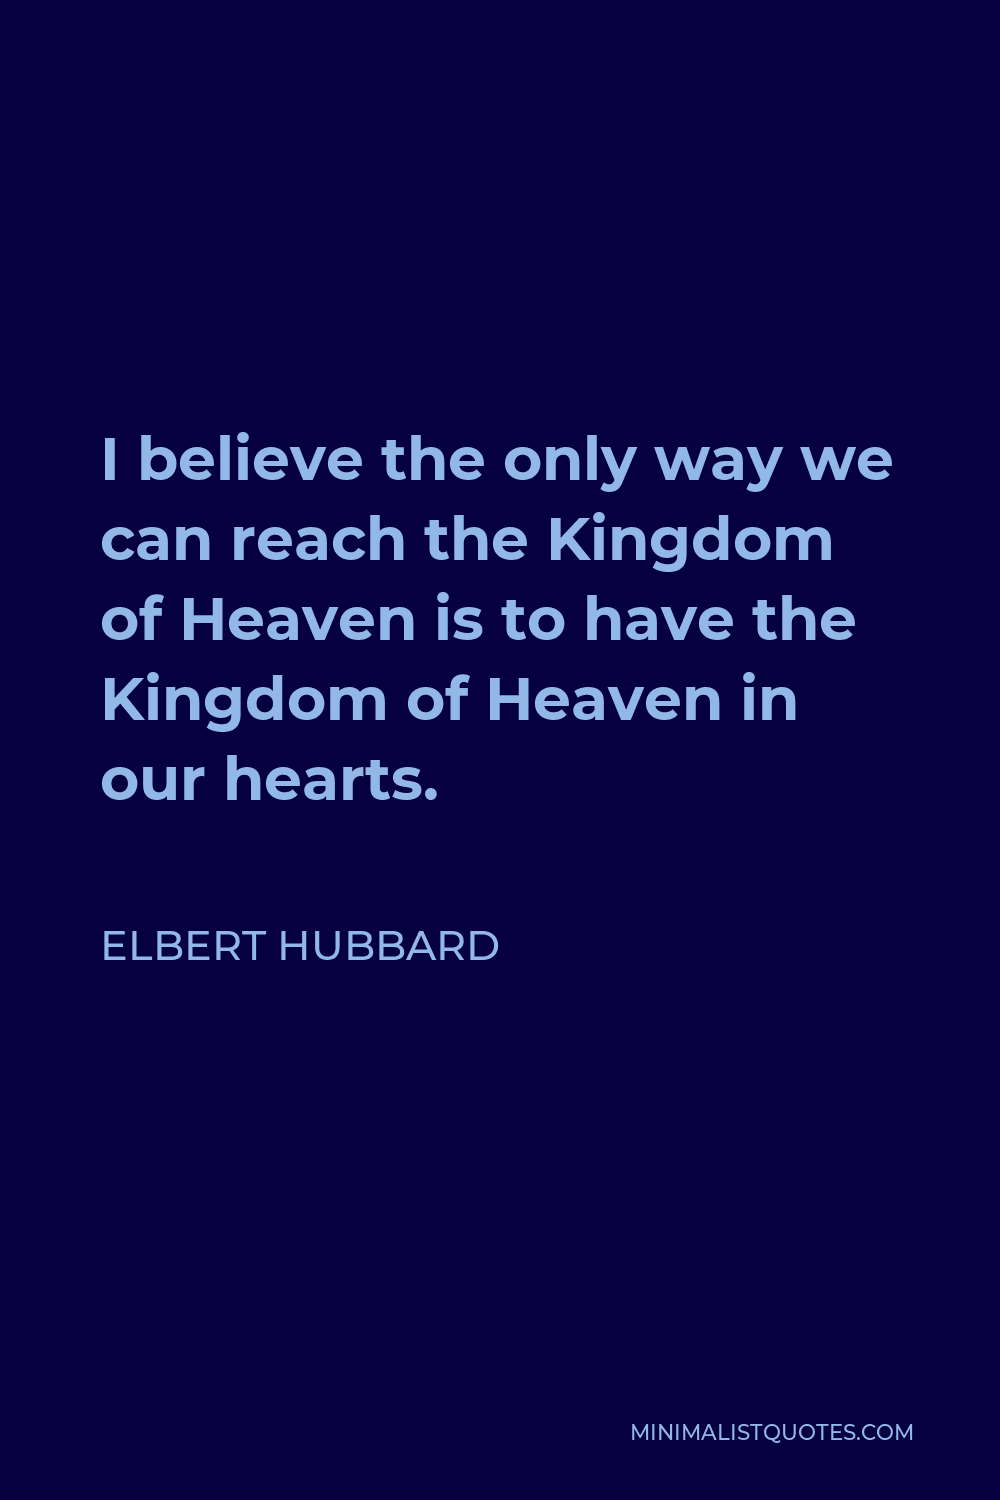 Elbert Hubbard Quote - I believe the only way we can reach the Kingdom of Heaven is to have the Kingdom of Heaven in our hearts.